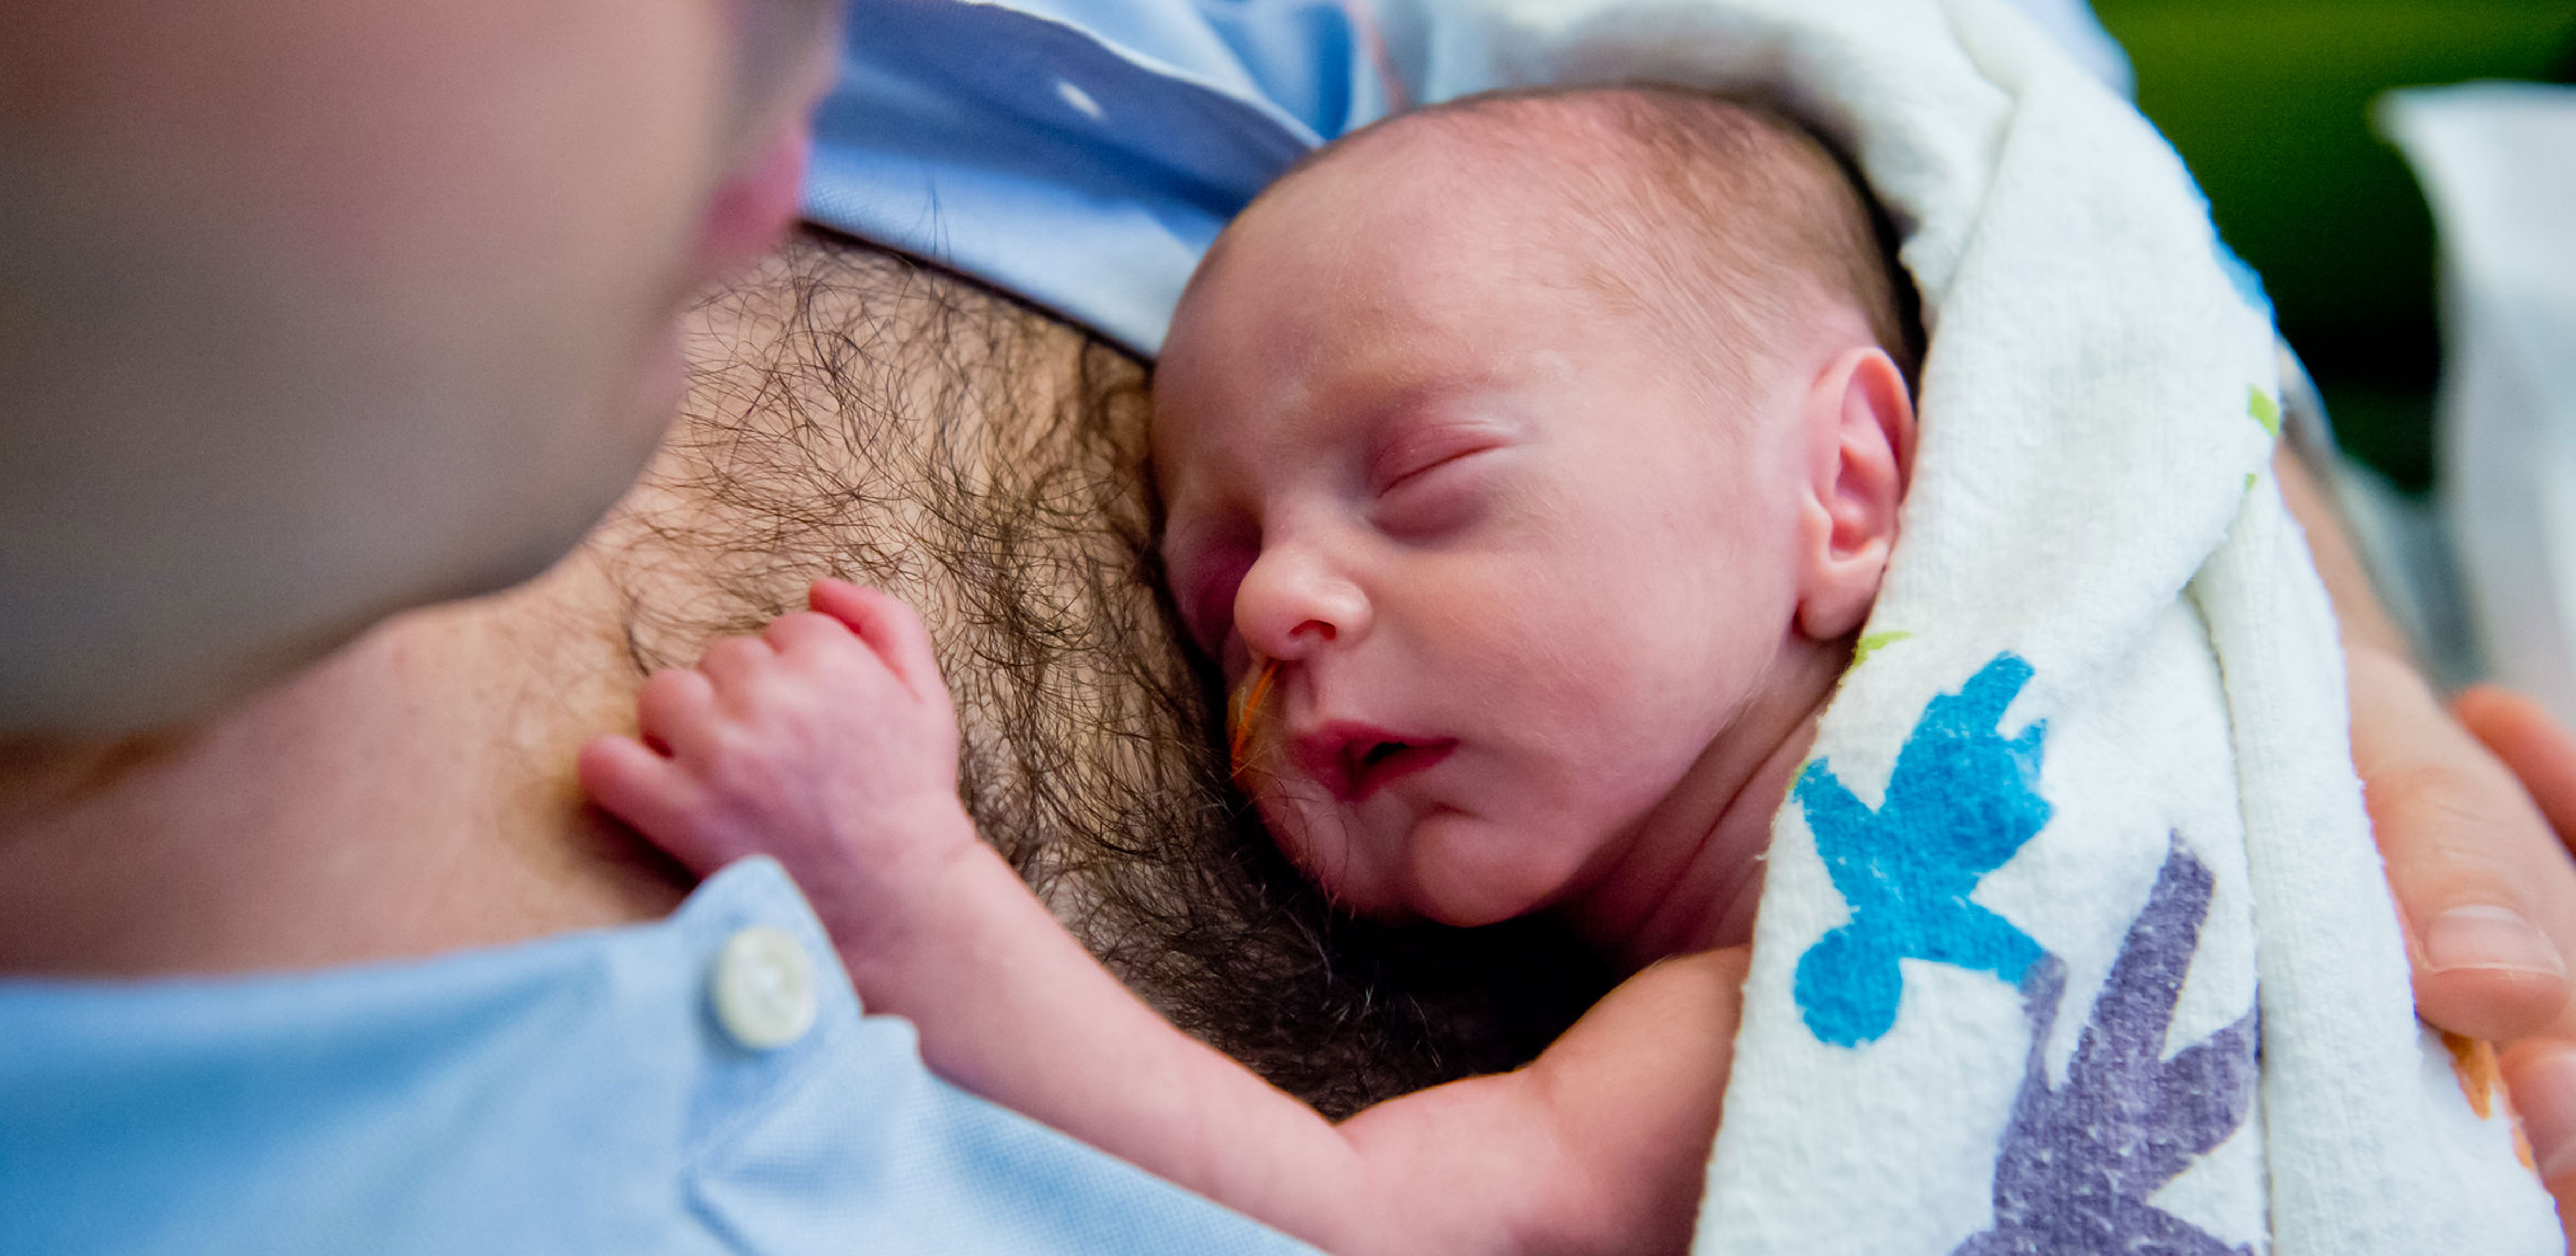 A preemie lies on it's father's bare chest